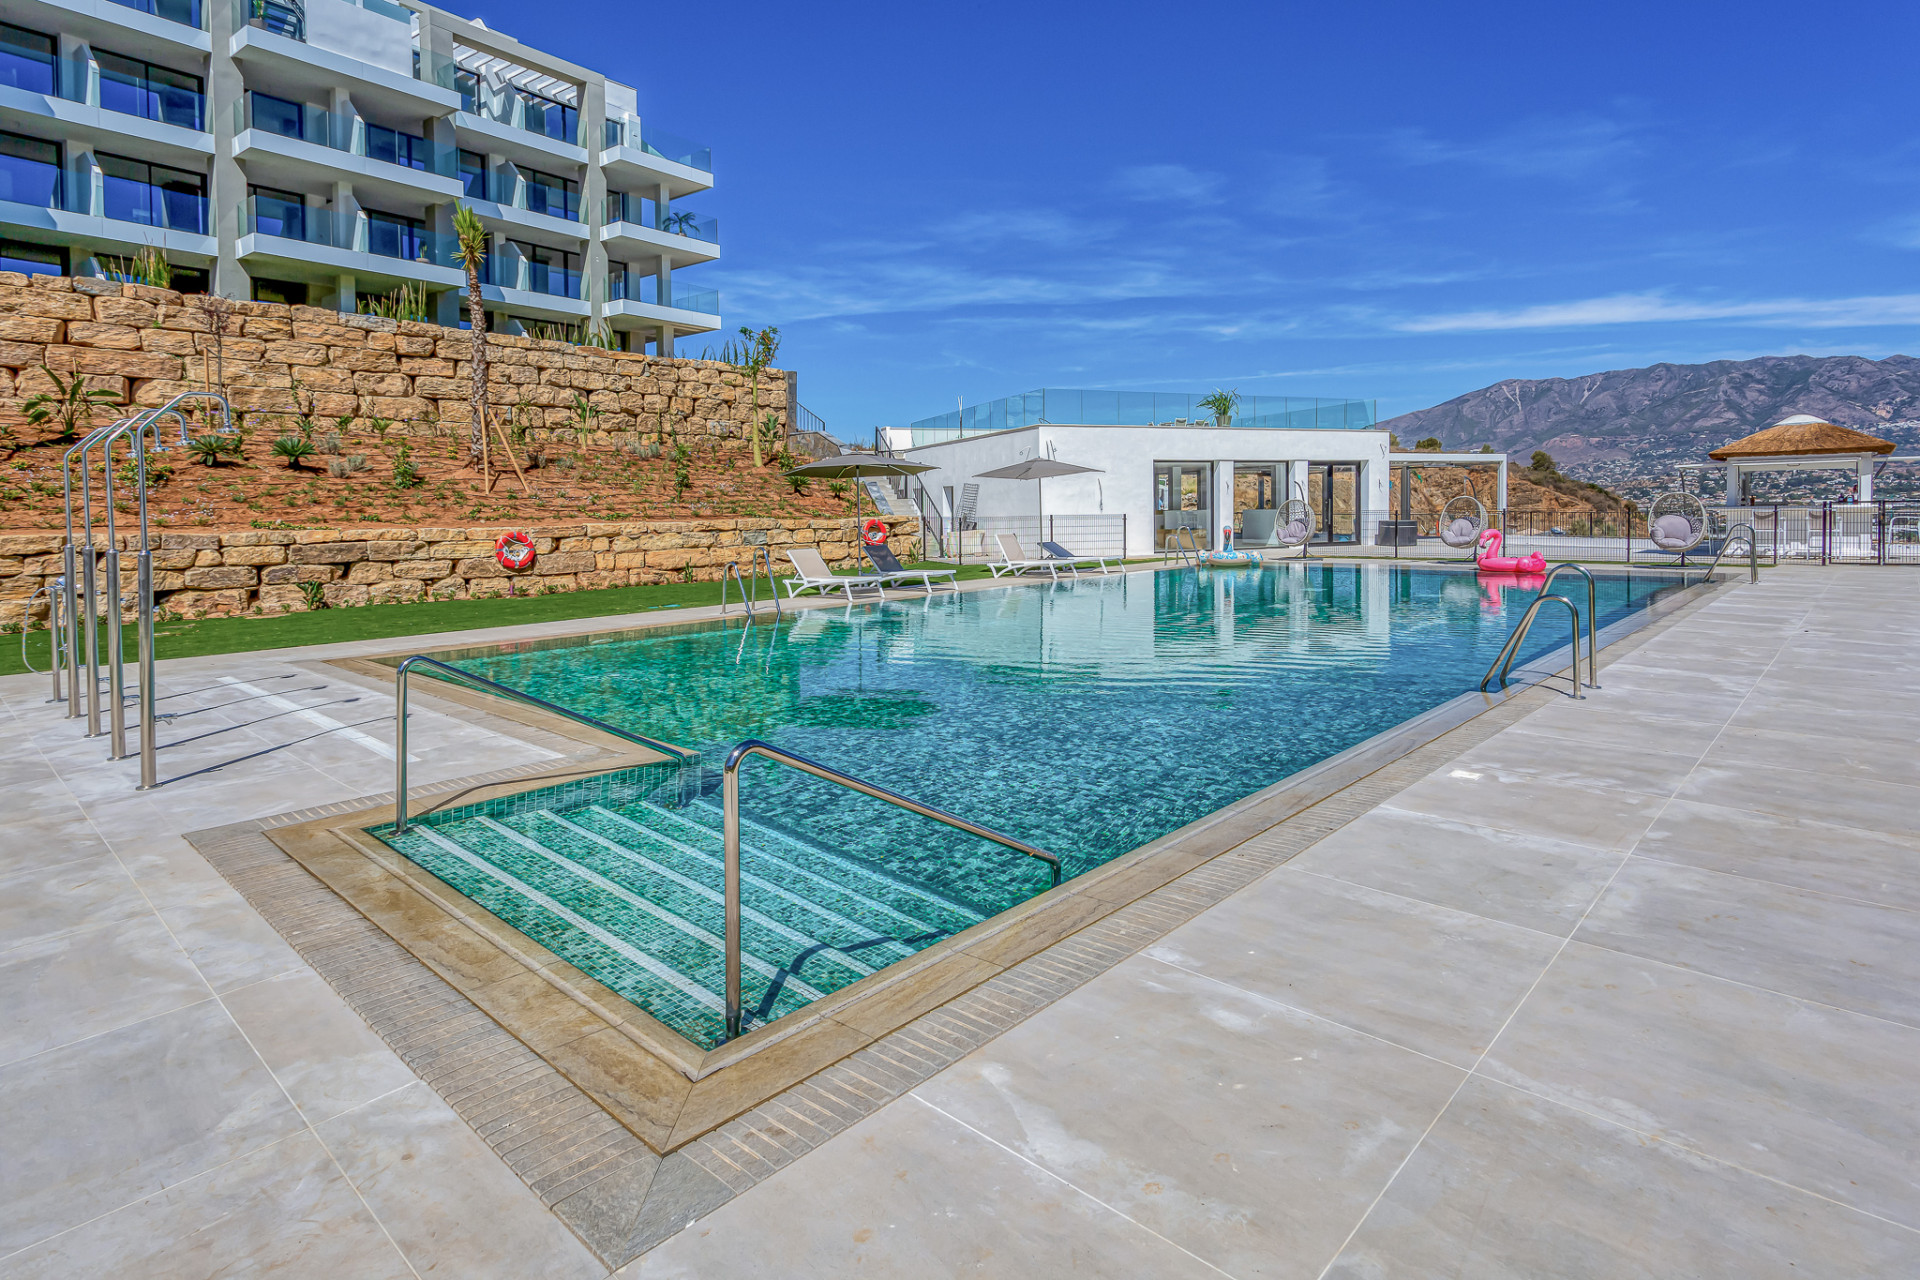 Complex of new and turnkey apartments in Cerros del Aguila, Meas Costa